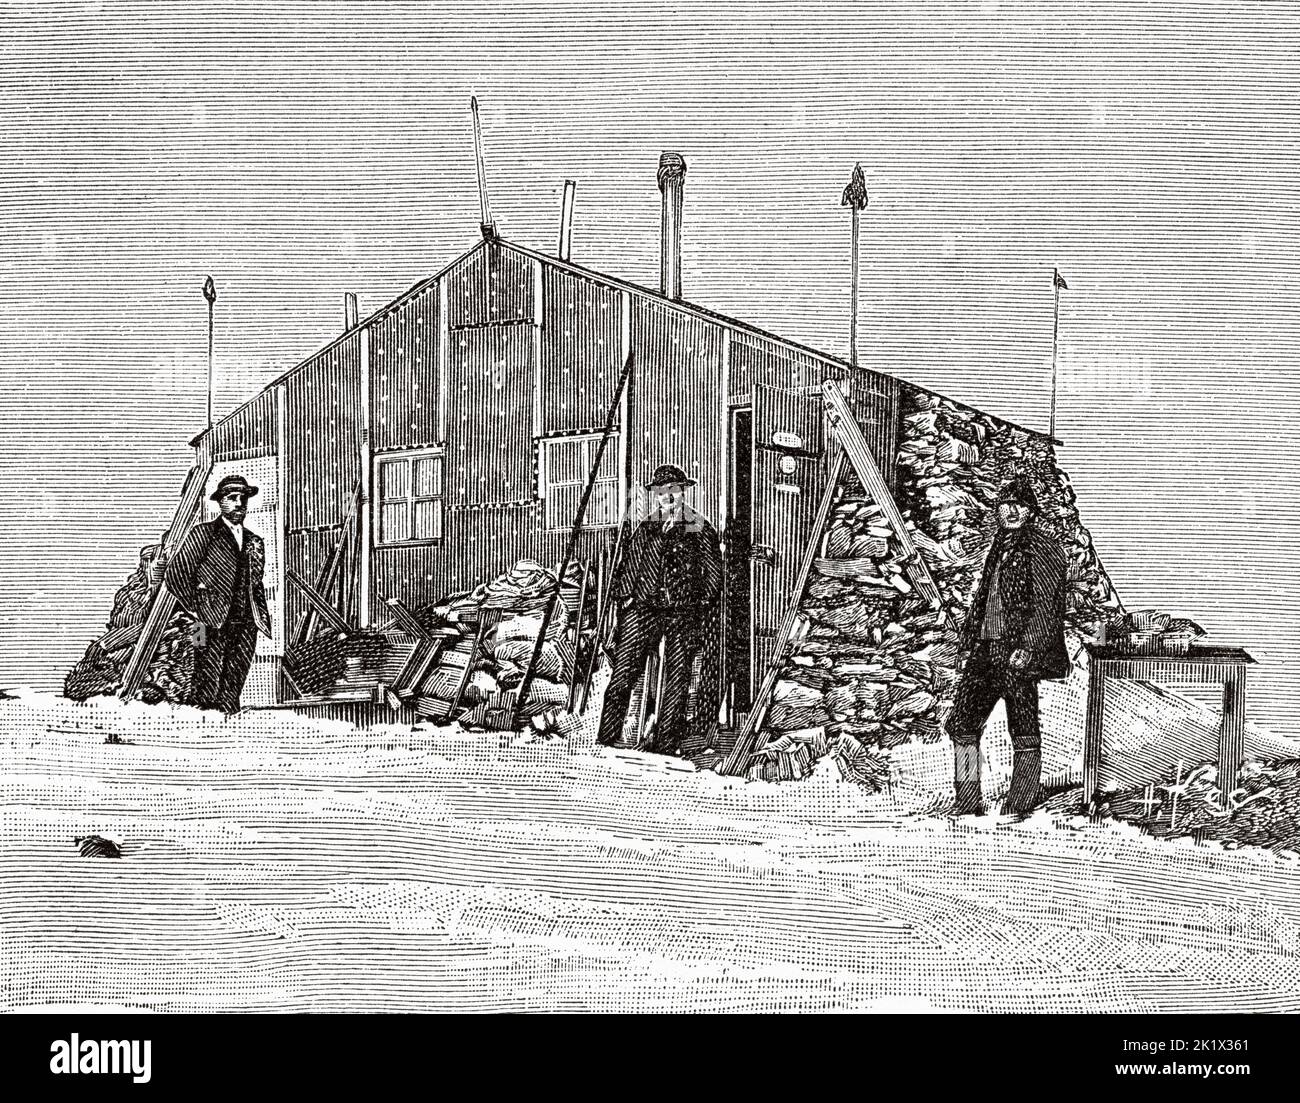 The highest scientific station in the world, the refuge of J Vallot in Mont-Blanc at 4400 meters altitude during its construction. Old 19th century engraved illustration from La Nature 1890 Stock Photo